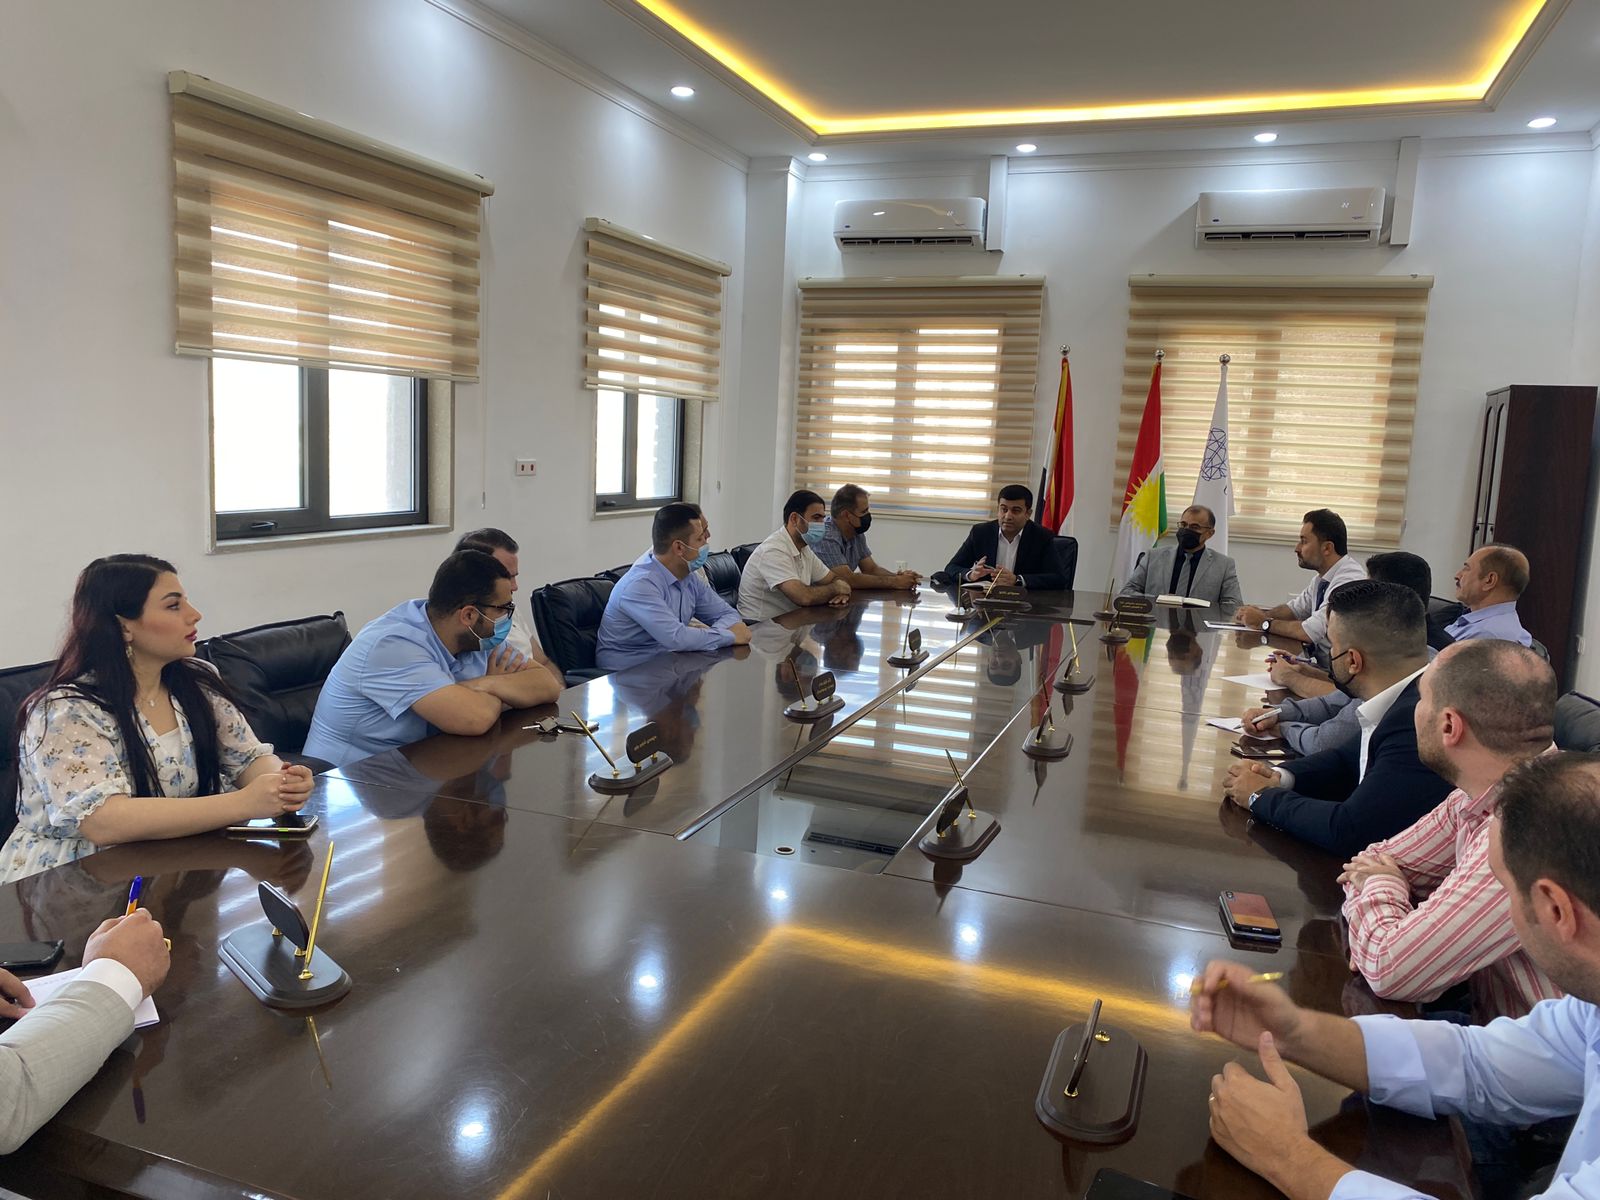 The presidency of Knowledge University had a meeting with all the academic staff on the occasion of the start of the new academic year 2021-2022